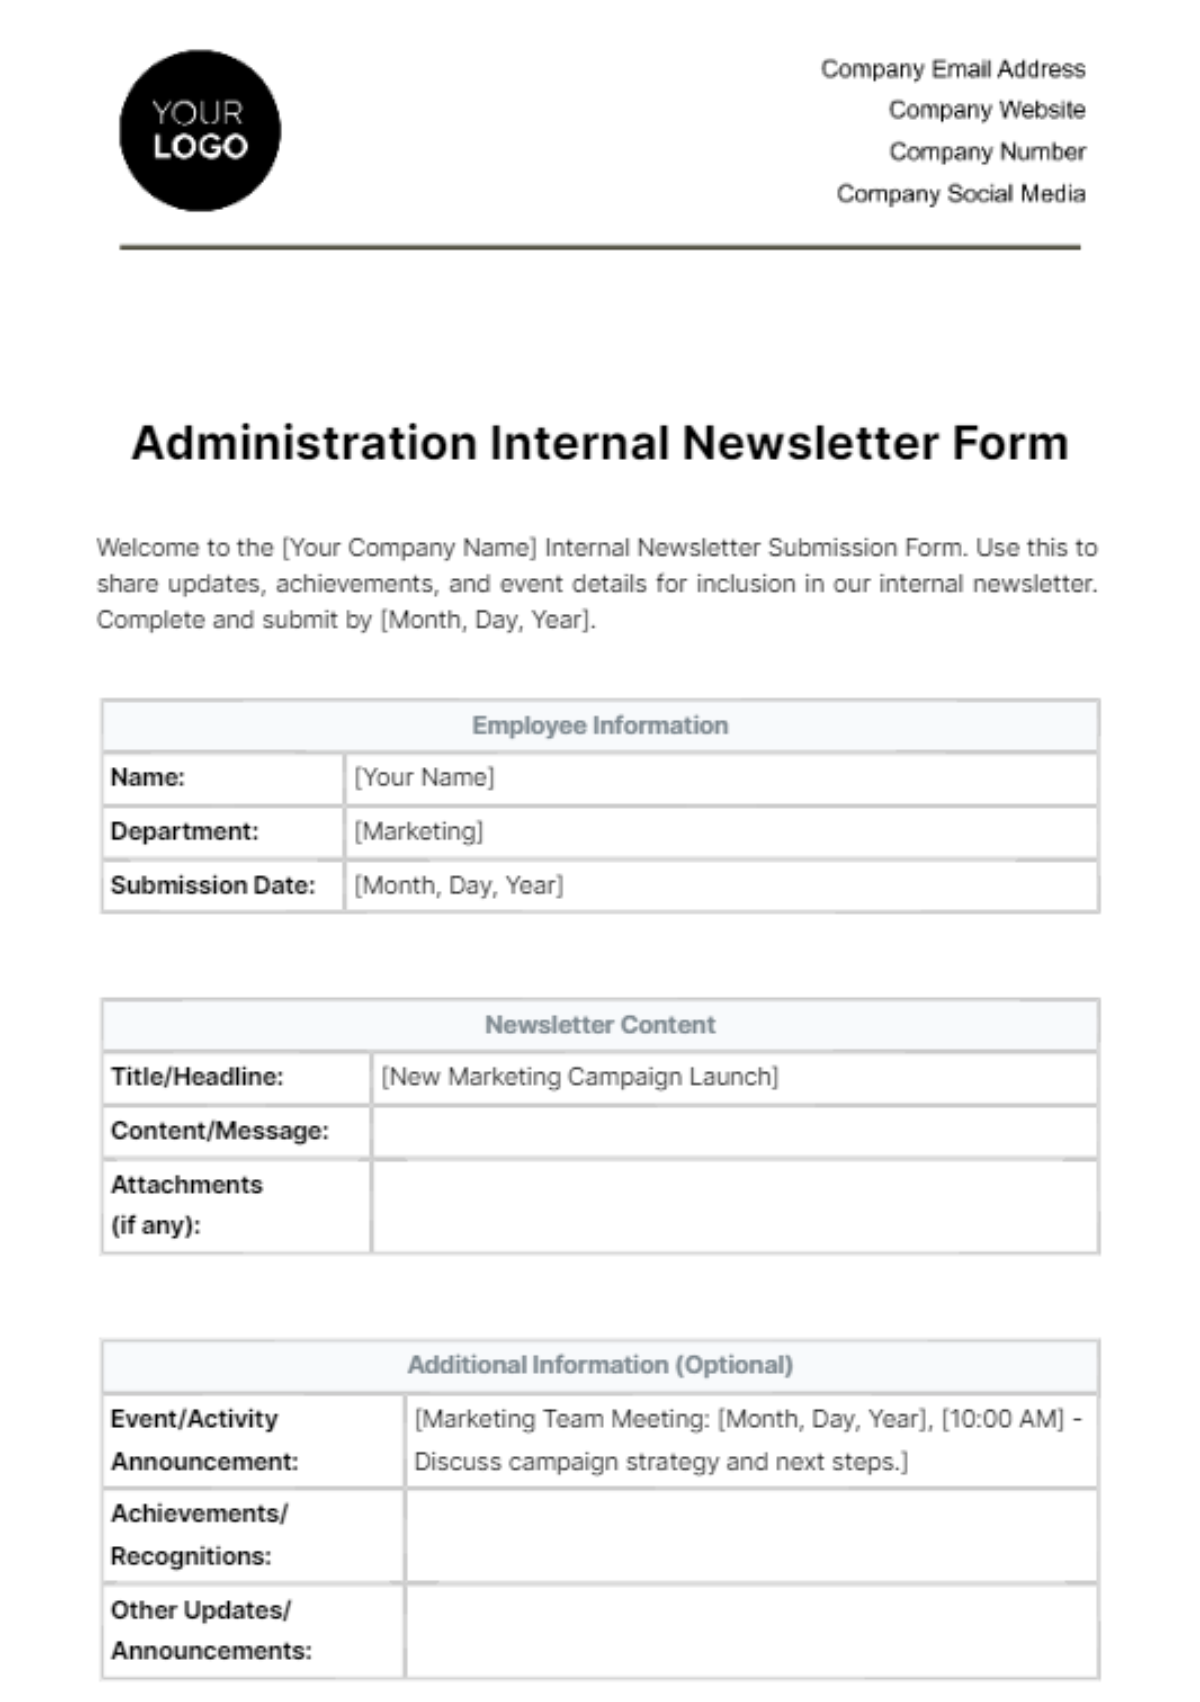 Free Administration Internal Newsletter Form Template